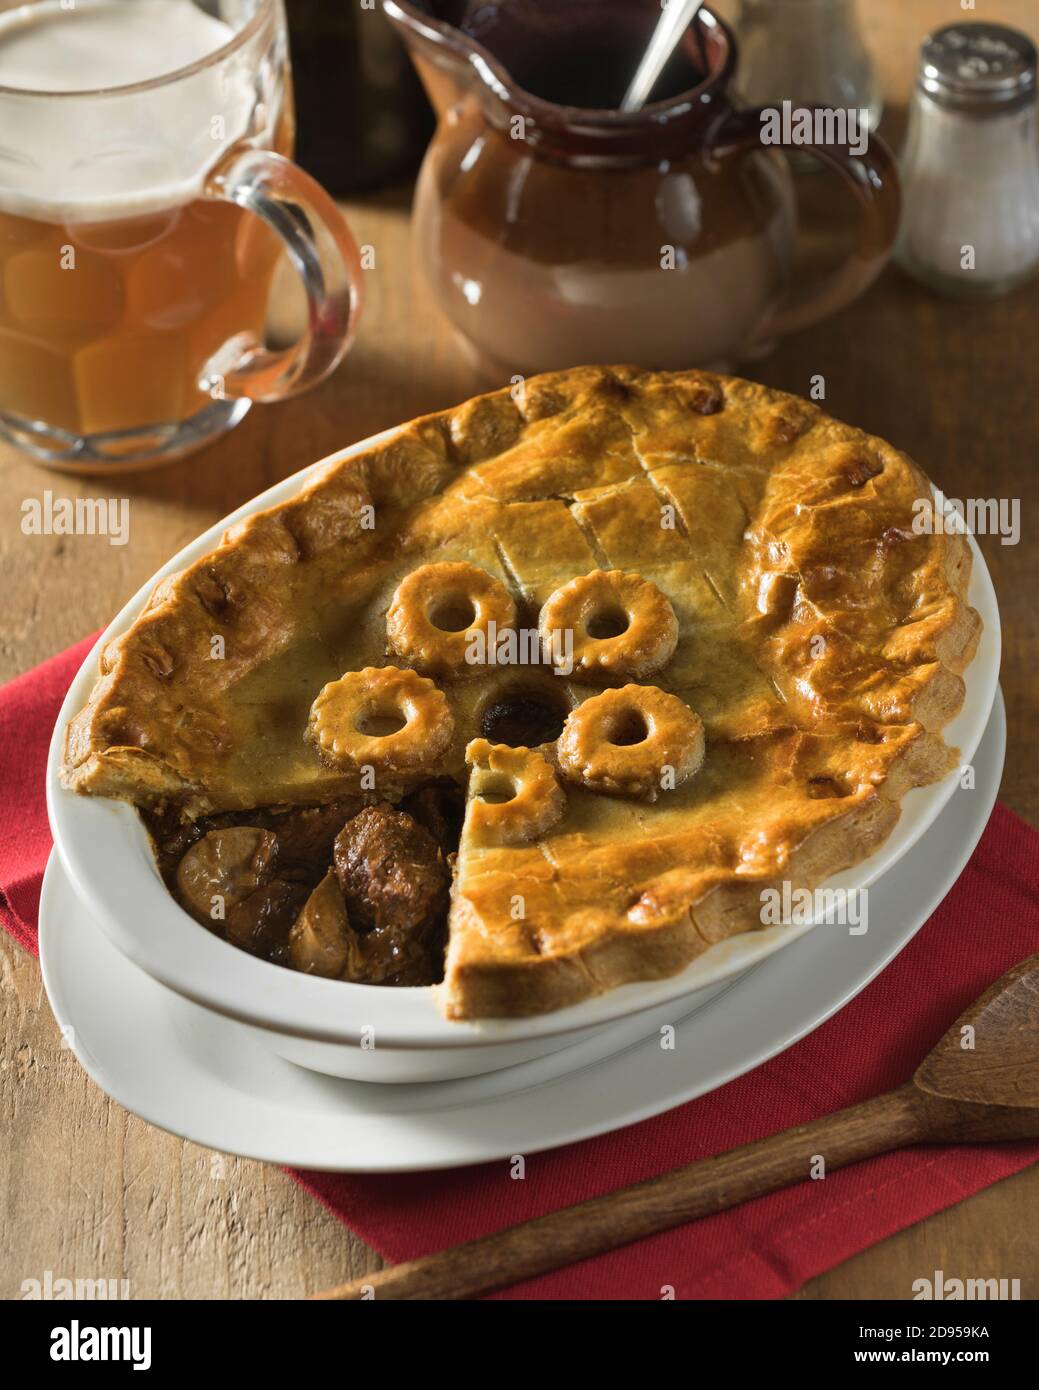 Steak and kidney pie. Traditional food UK Stock Photo